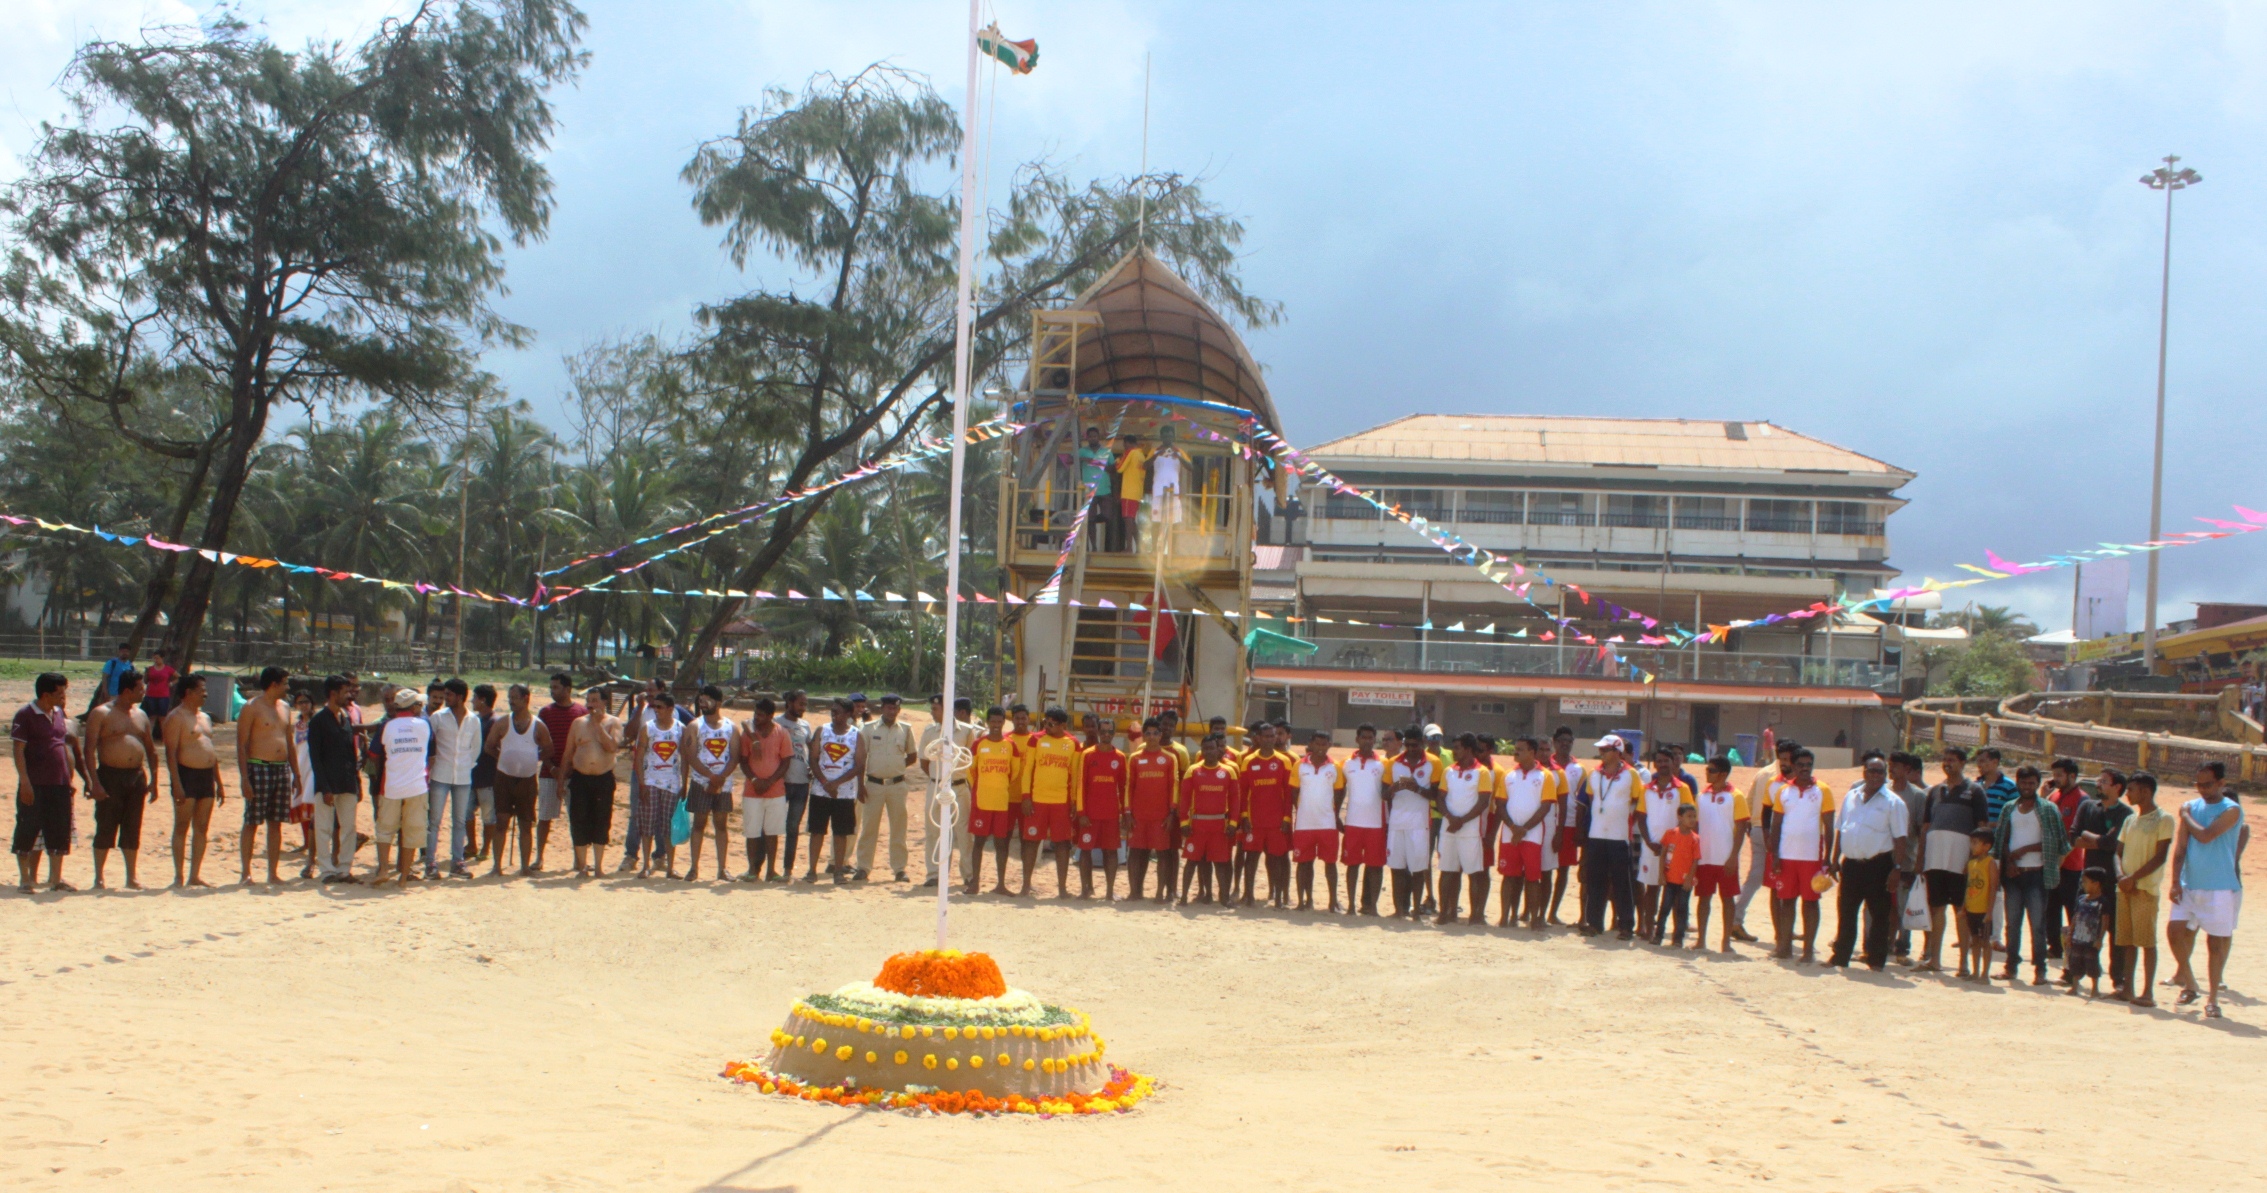 Picture 2 - Drishti lifeguards along with beach goers celebrated India's 70th Independence Day at Calangute beach